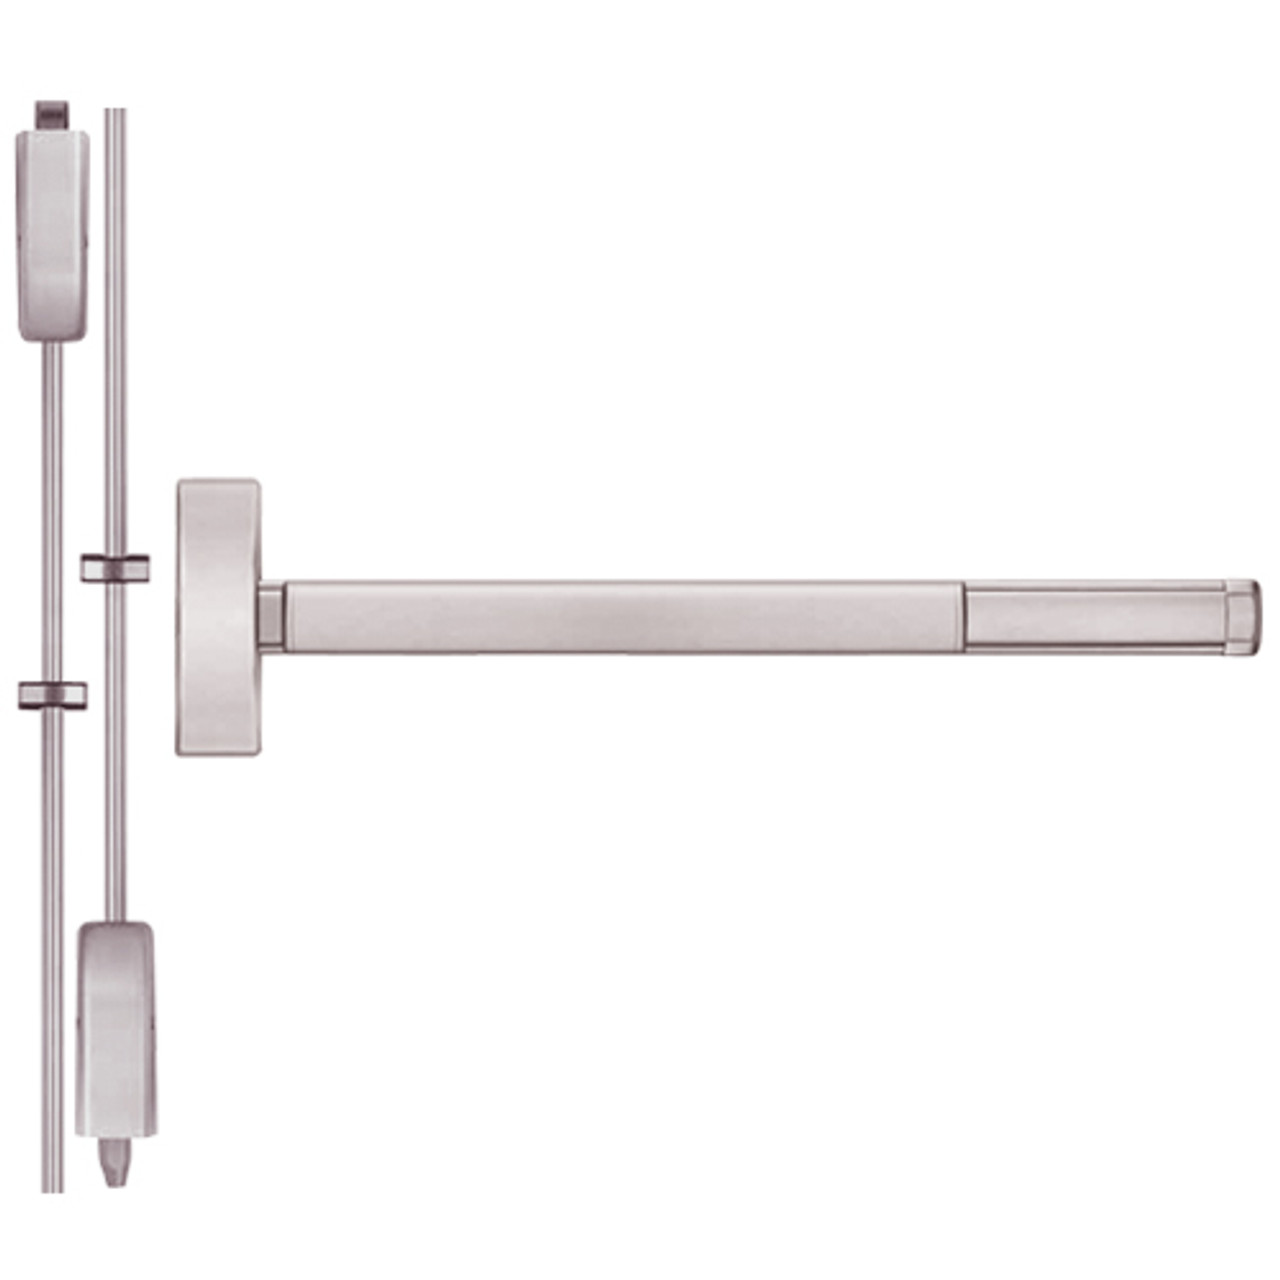 ELR2208LBR-628-48 PHI 2200 Series Non Fire Rated Apex Surface Vertical Rod Device with Electric Latch Retraction Prepped for Key Controls Lever/Knob in Satin Aluminum Finish